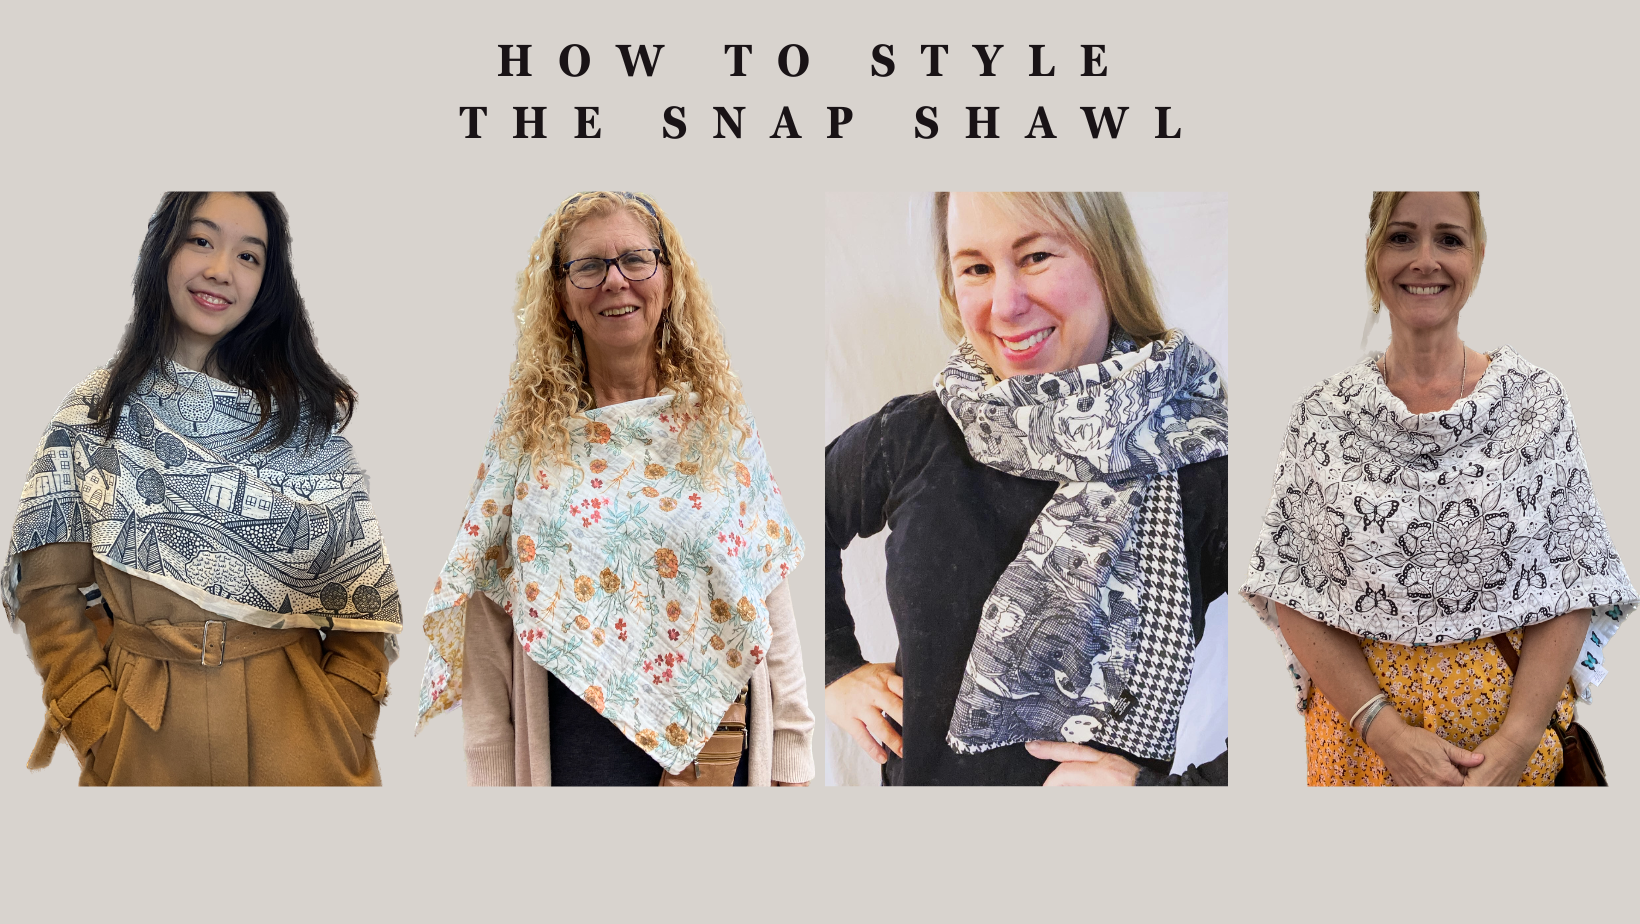 Load video: a tutorial on how to wear the snap shawl